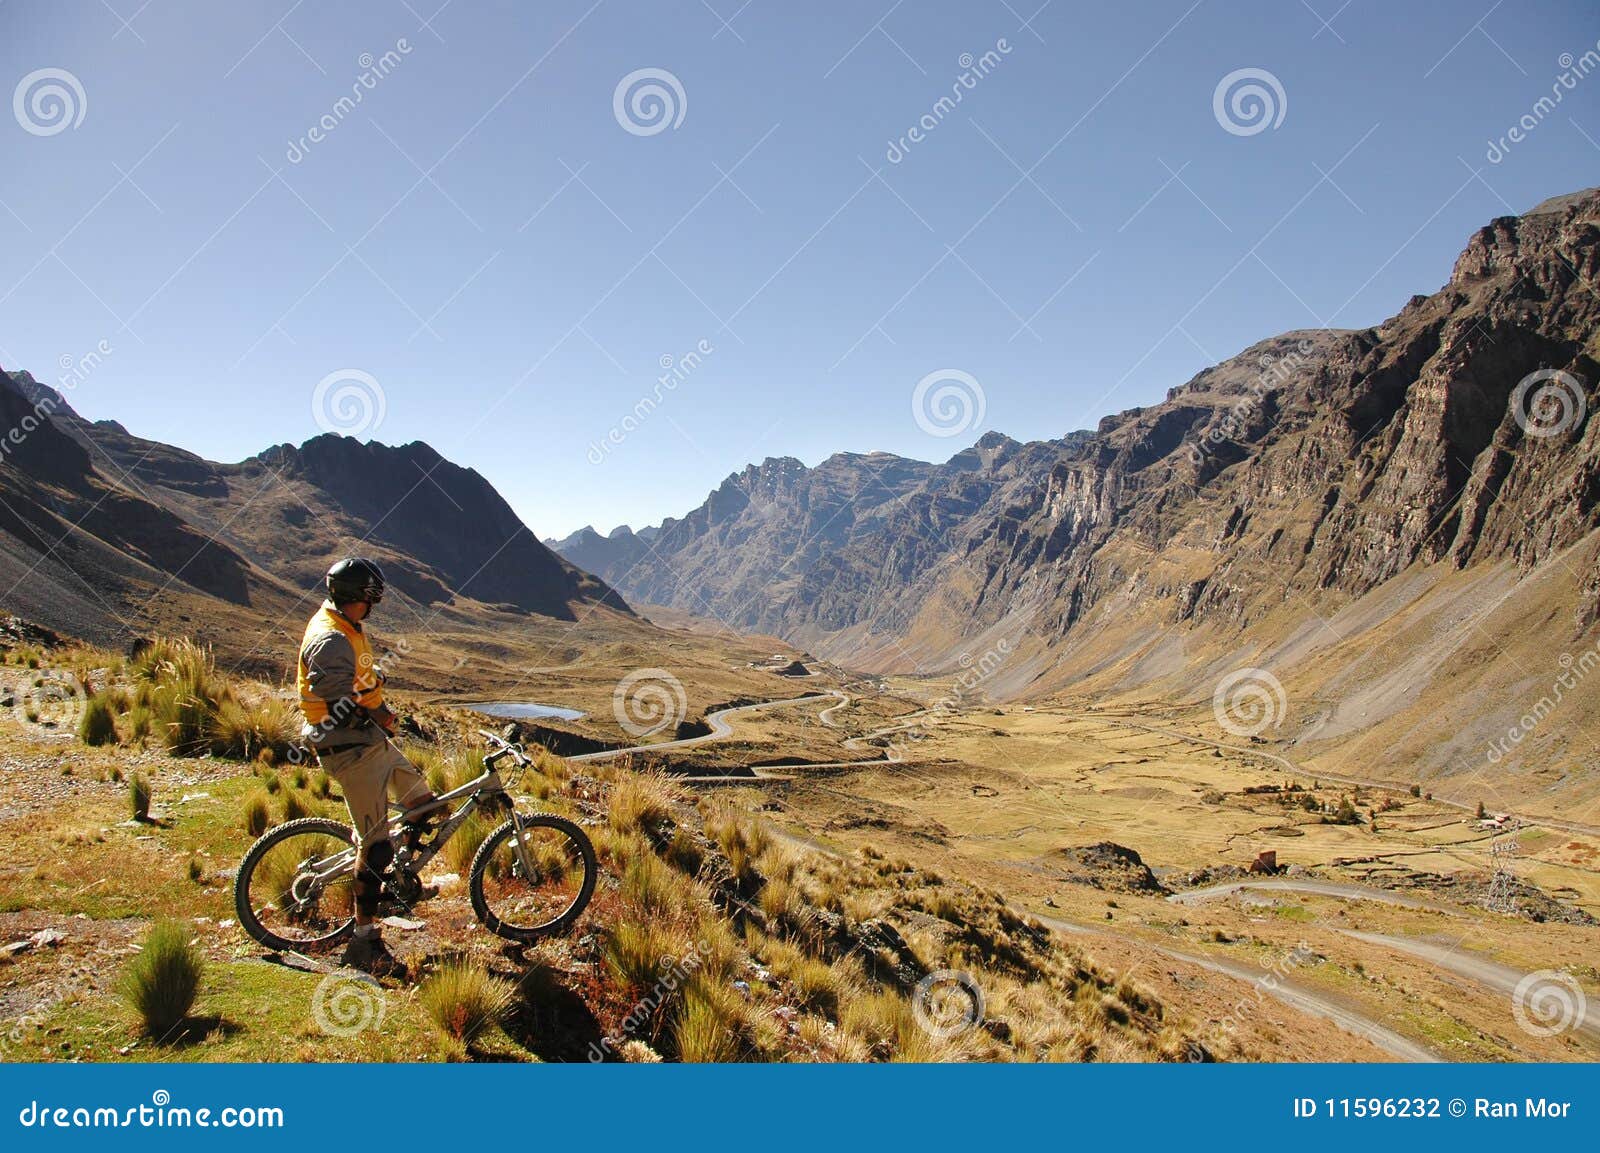 mountain biker looking at valley